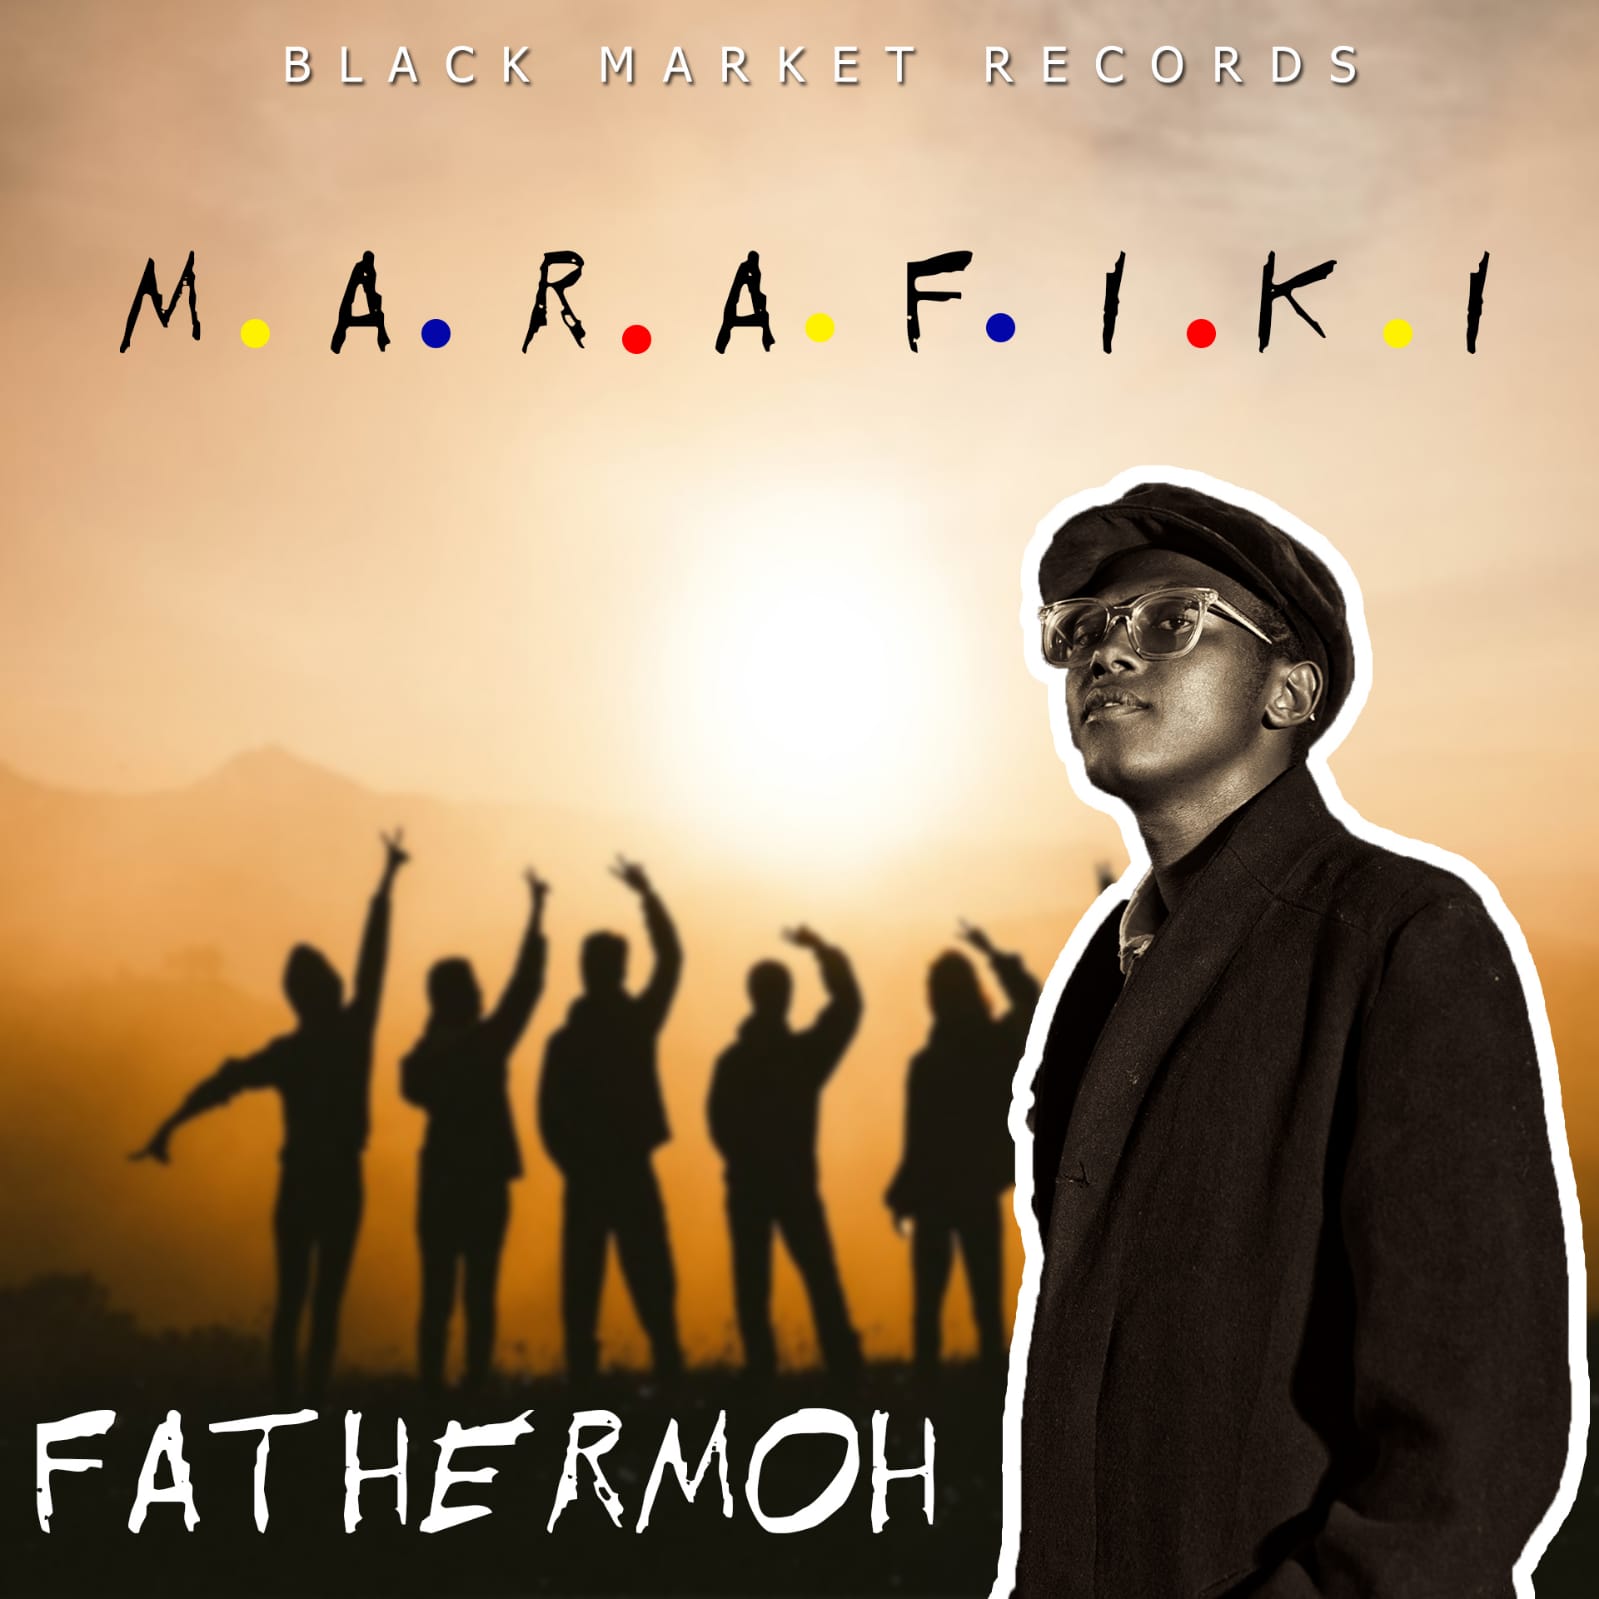 Fathermoh’s “Marafiki” song is set to come out this week.